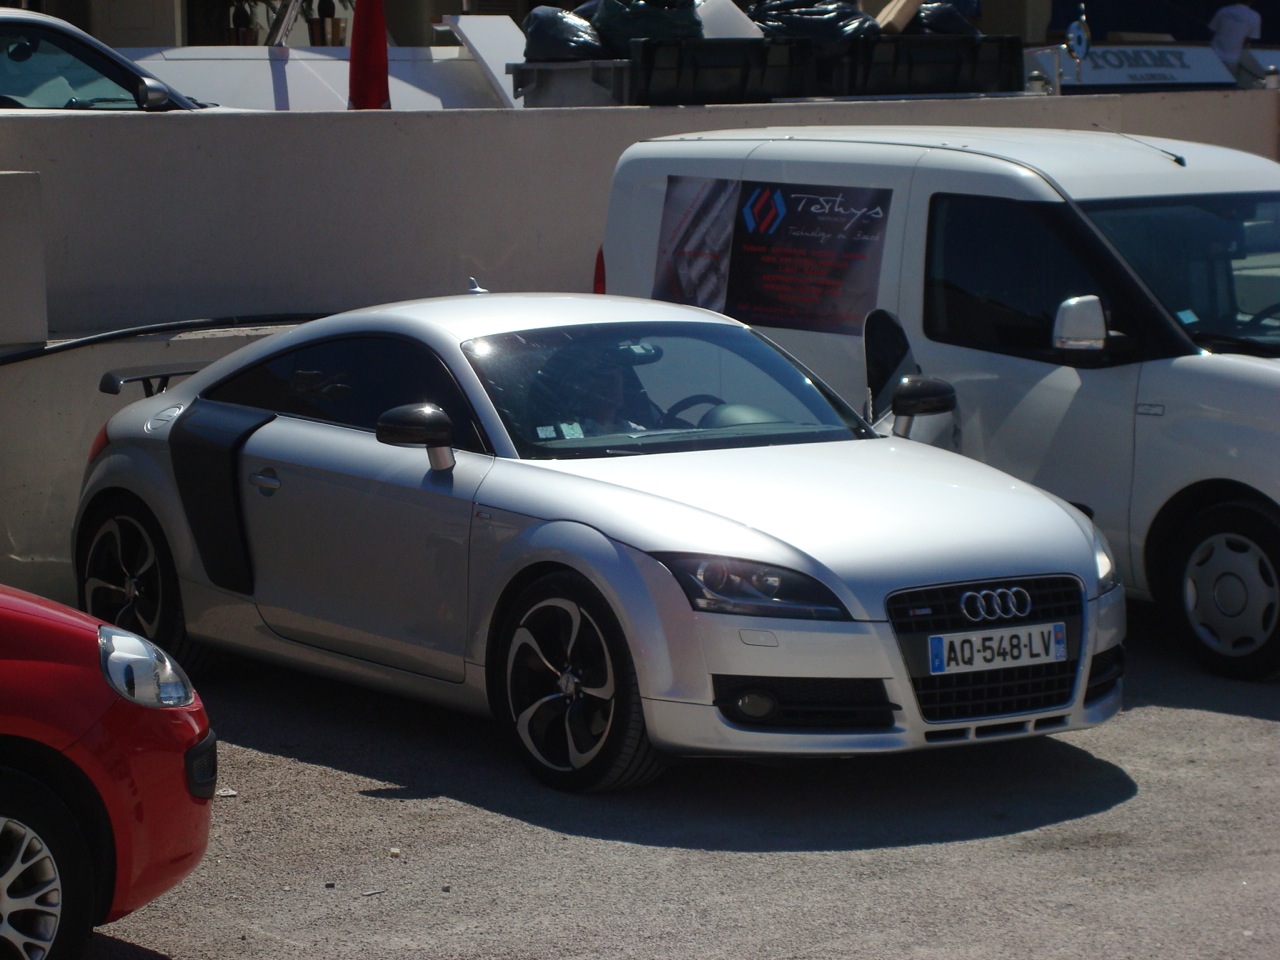 Audi TT trying to be an R8